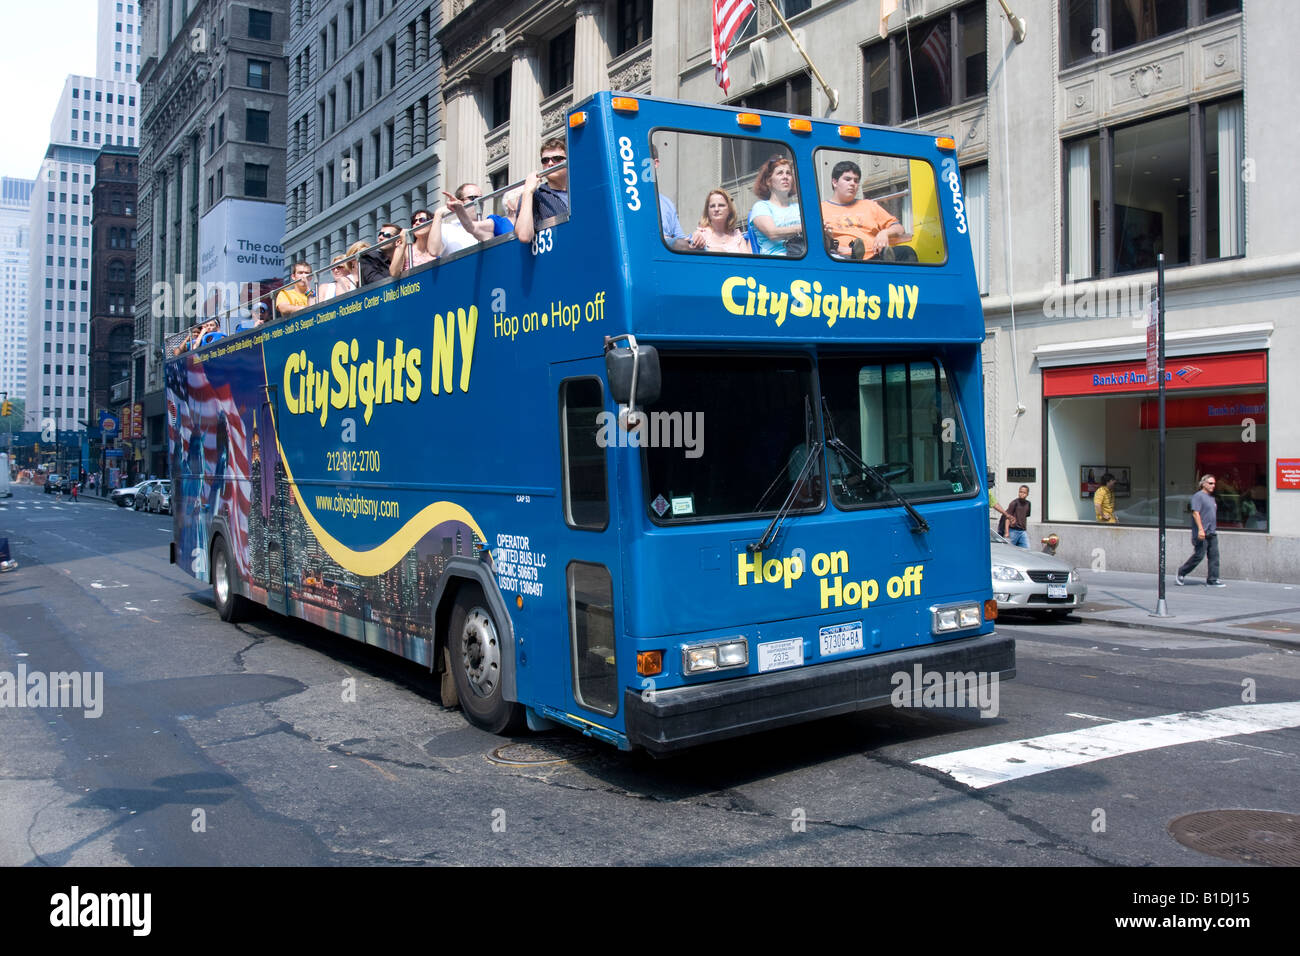 A City Sights NY tour bus on Broadway in Lower Manhattan, NY. Stock Photo